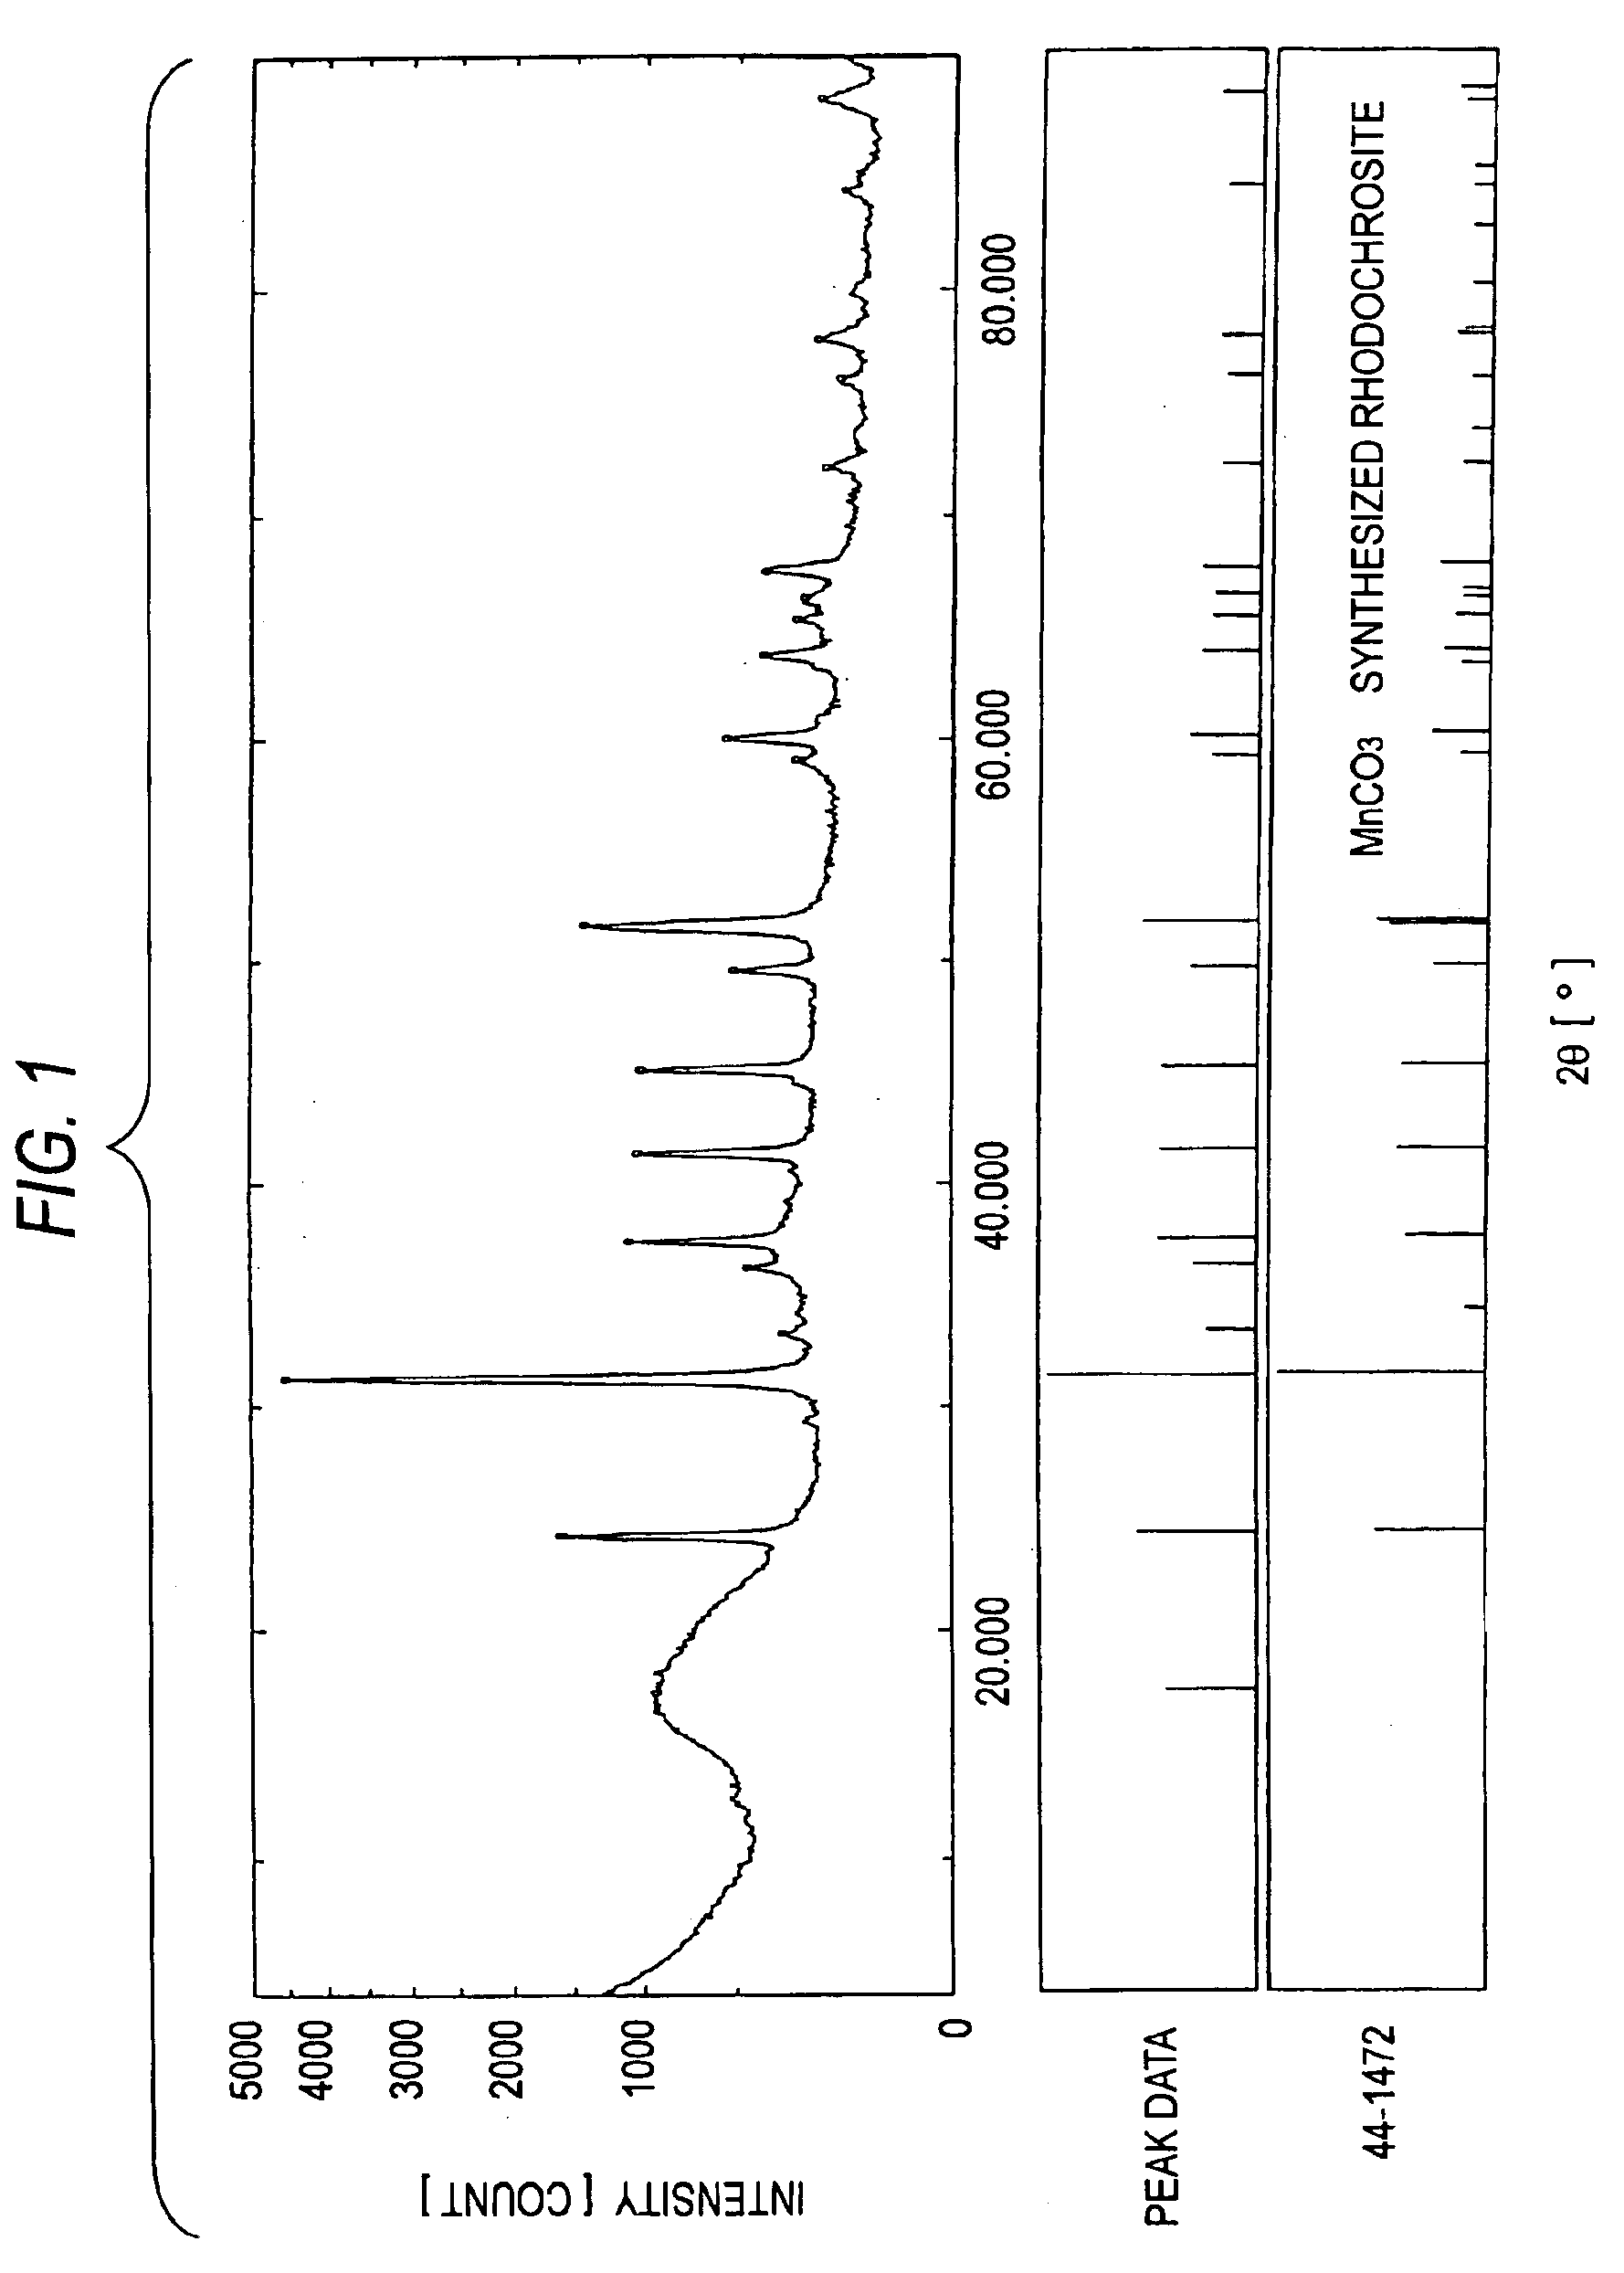 Catalyst for fluidized catalytic cracking of heavy hydrocarbon oil and method of fluidized catalytic cracking